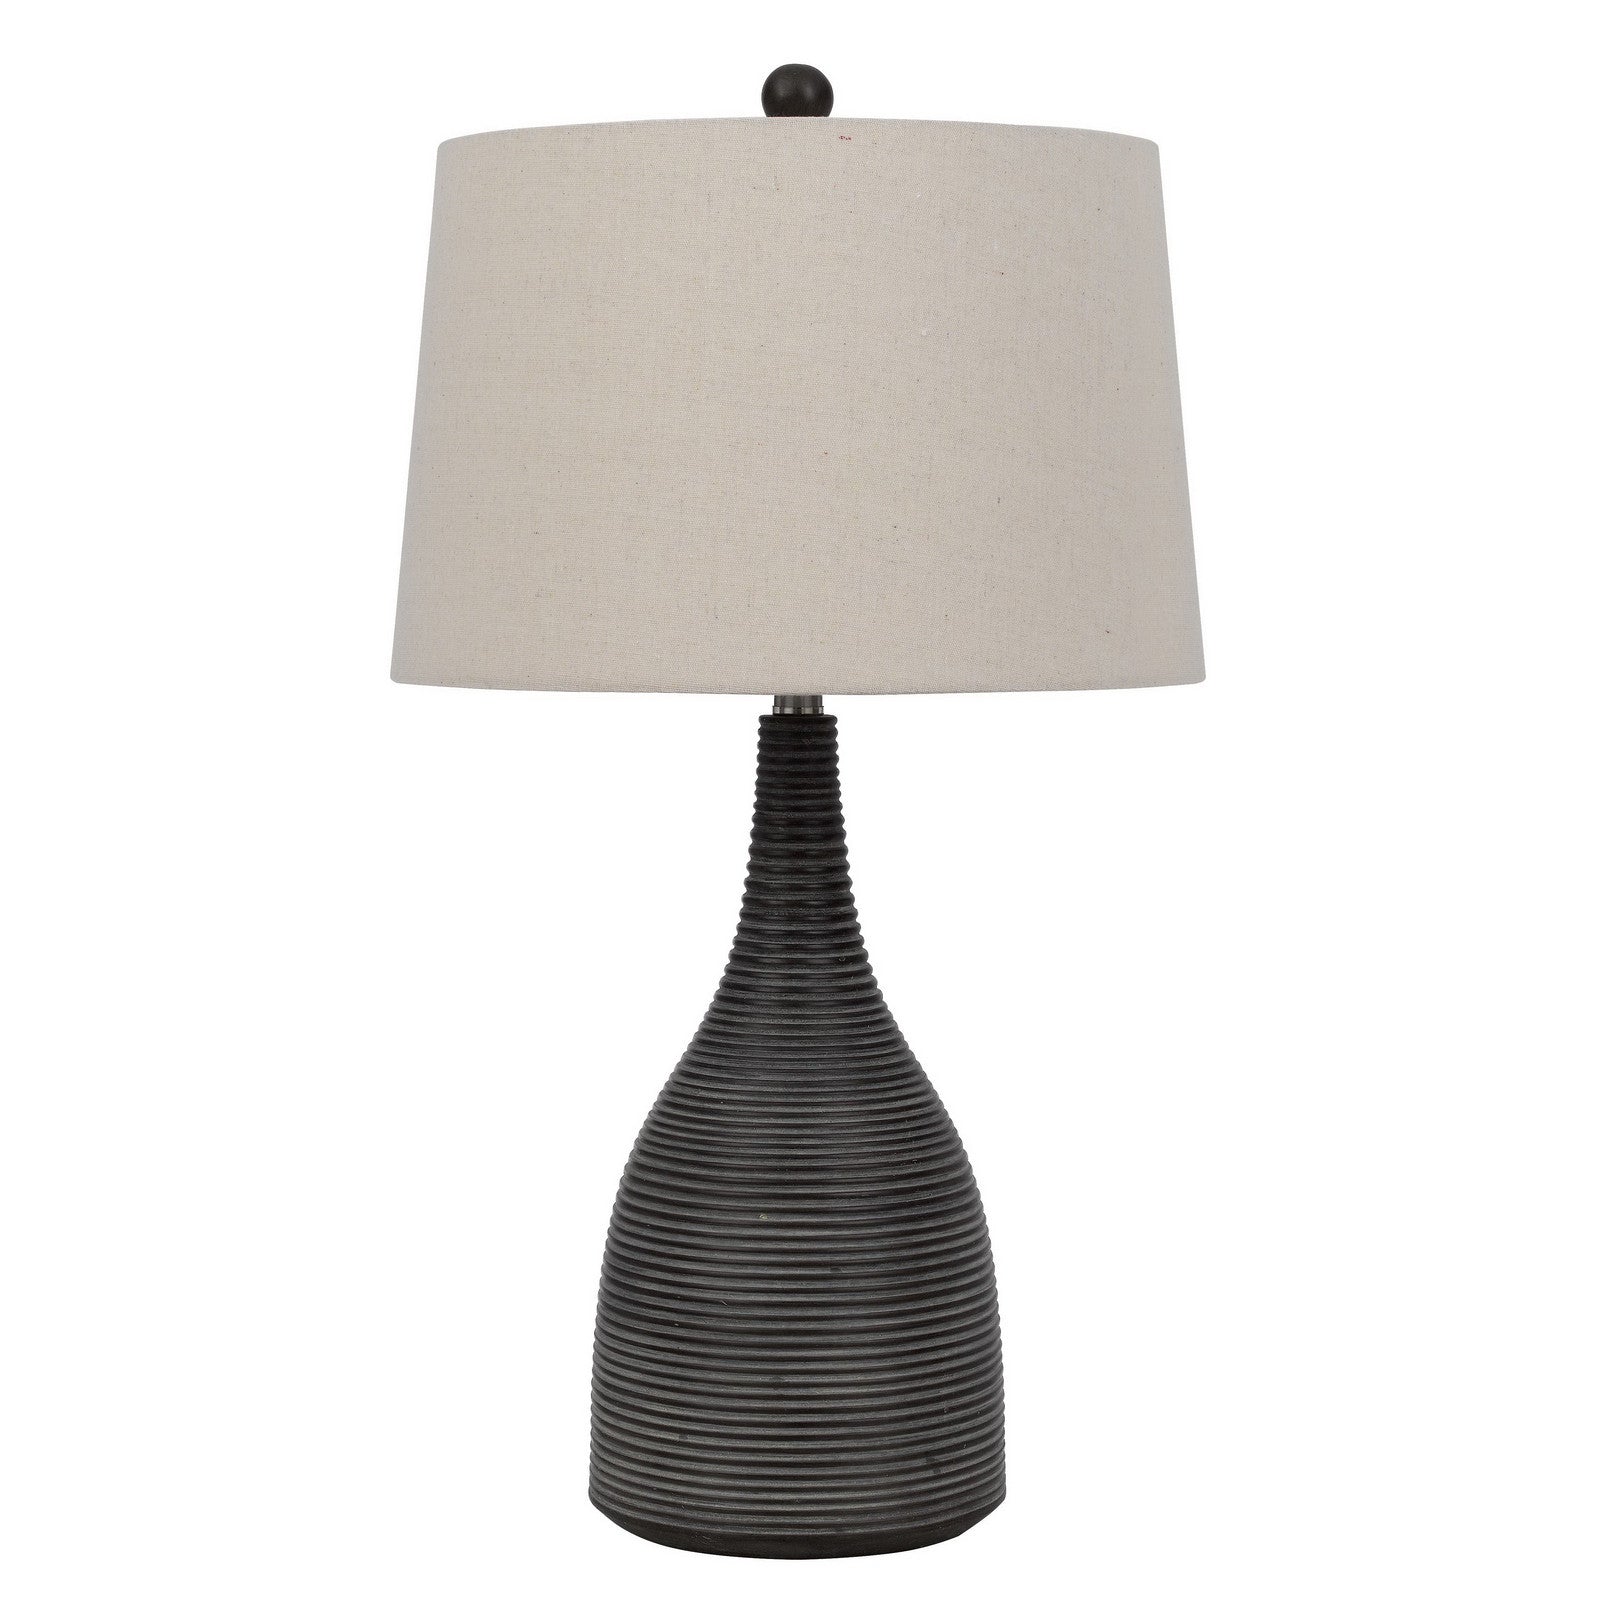 29" Black Ceramic Table Lamp With Beige Empire Shade